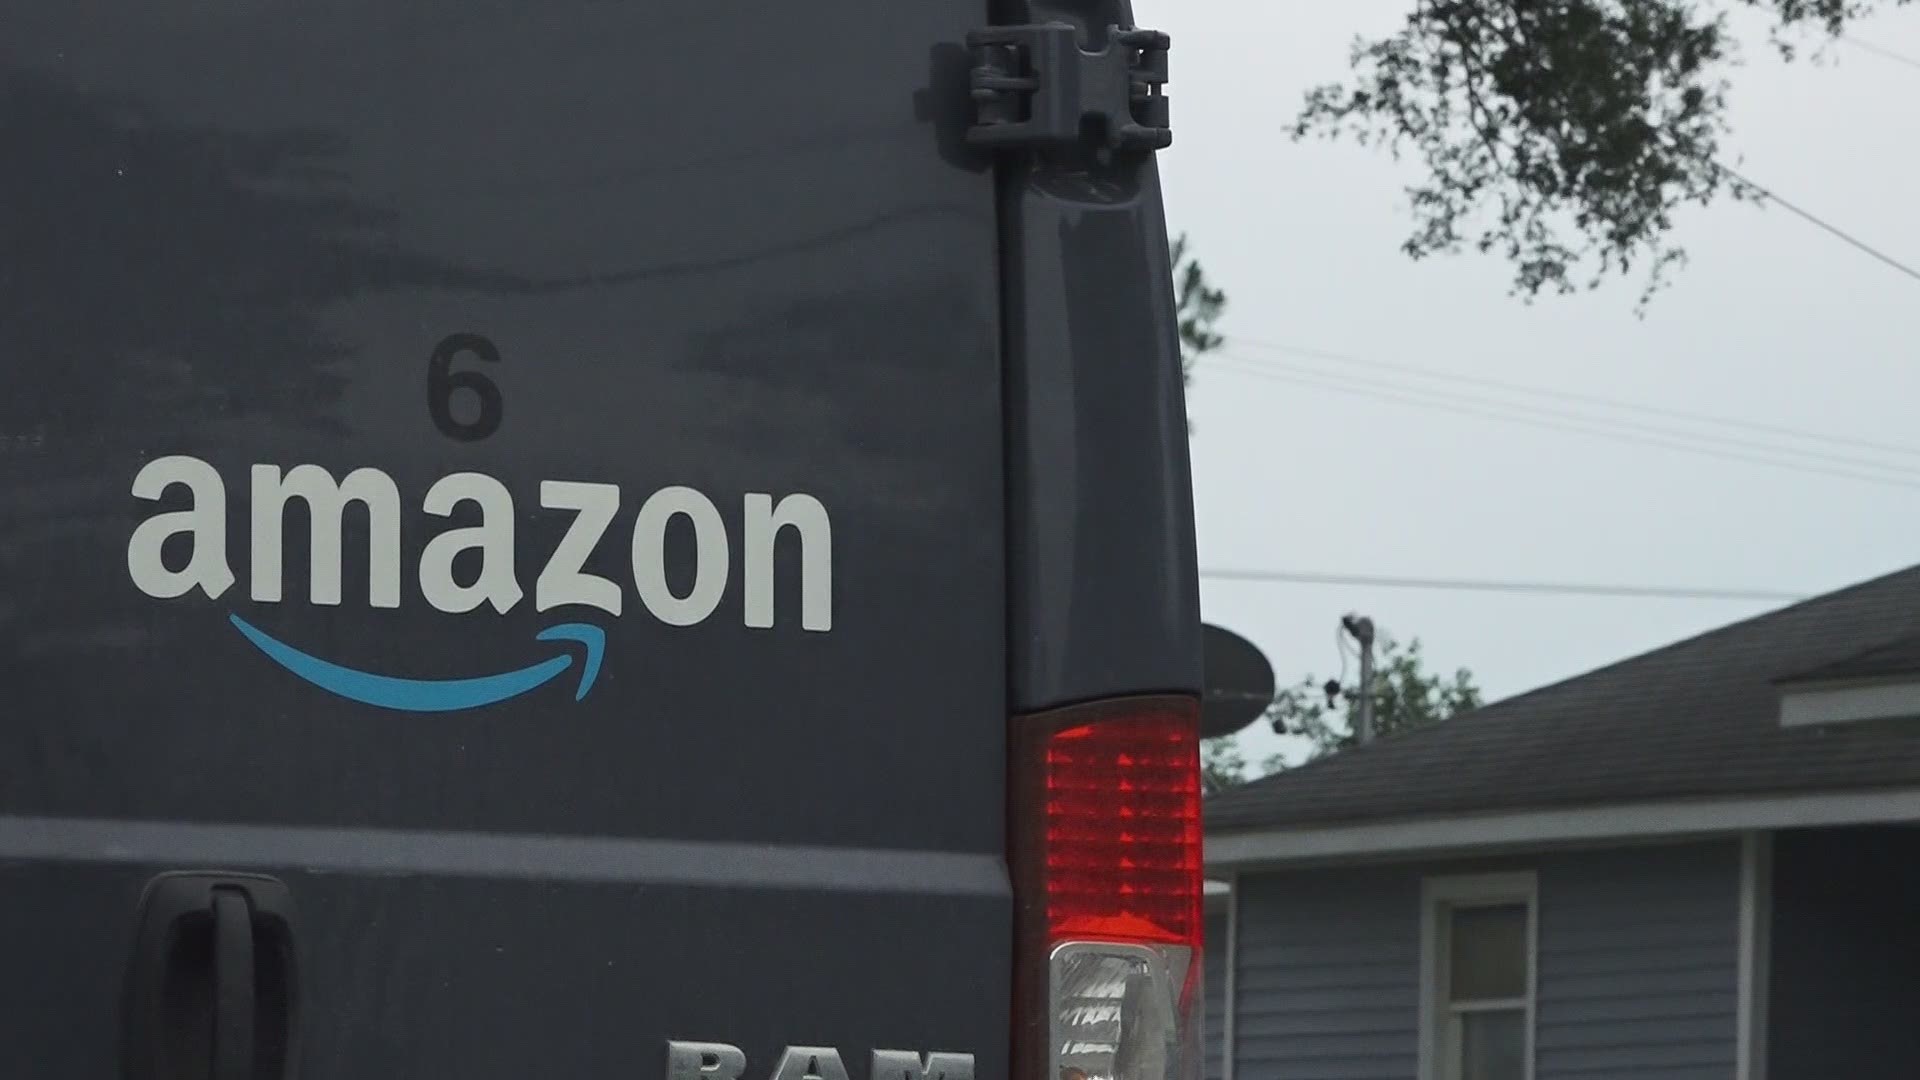 Amazon Prime Day is one of the biggest shopping days of the year, making online shoppers more vulnerable to scams.